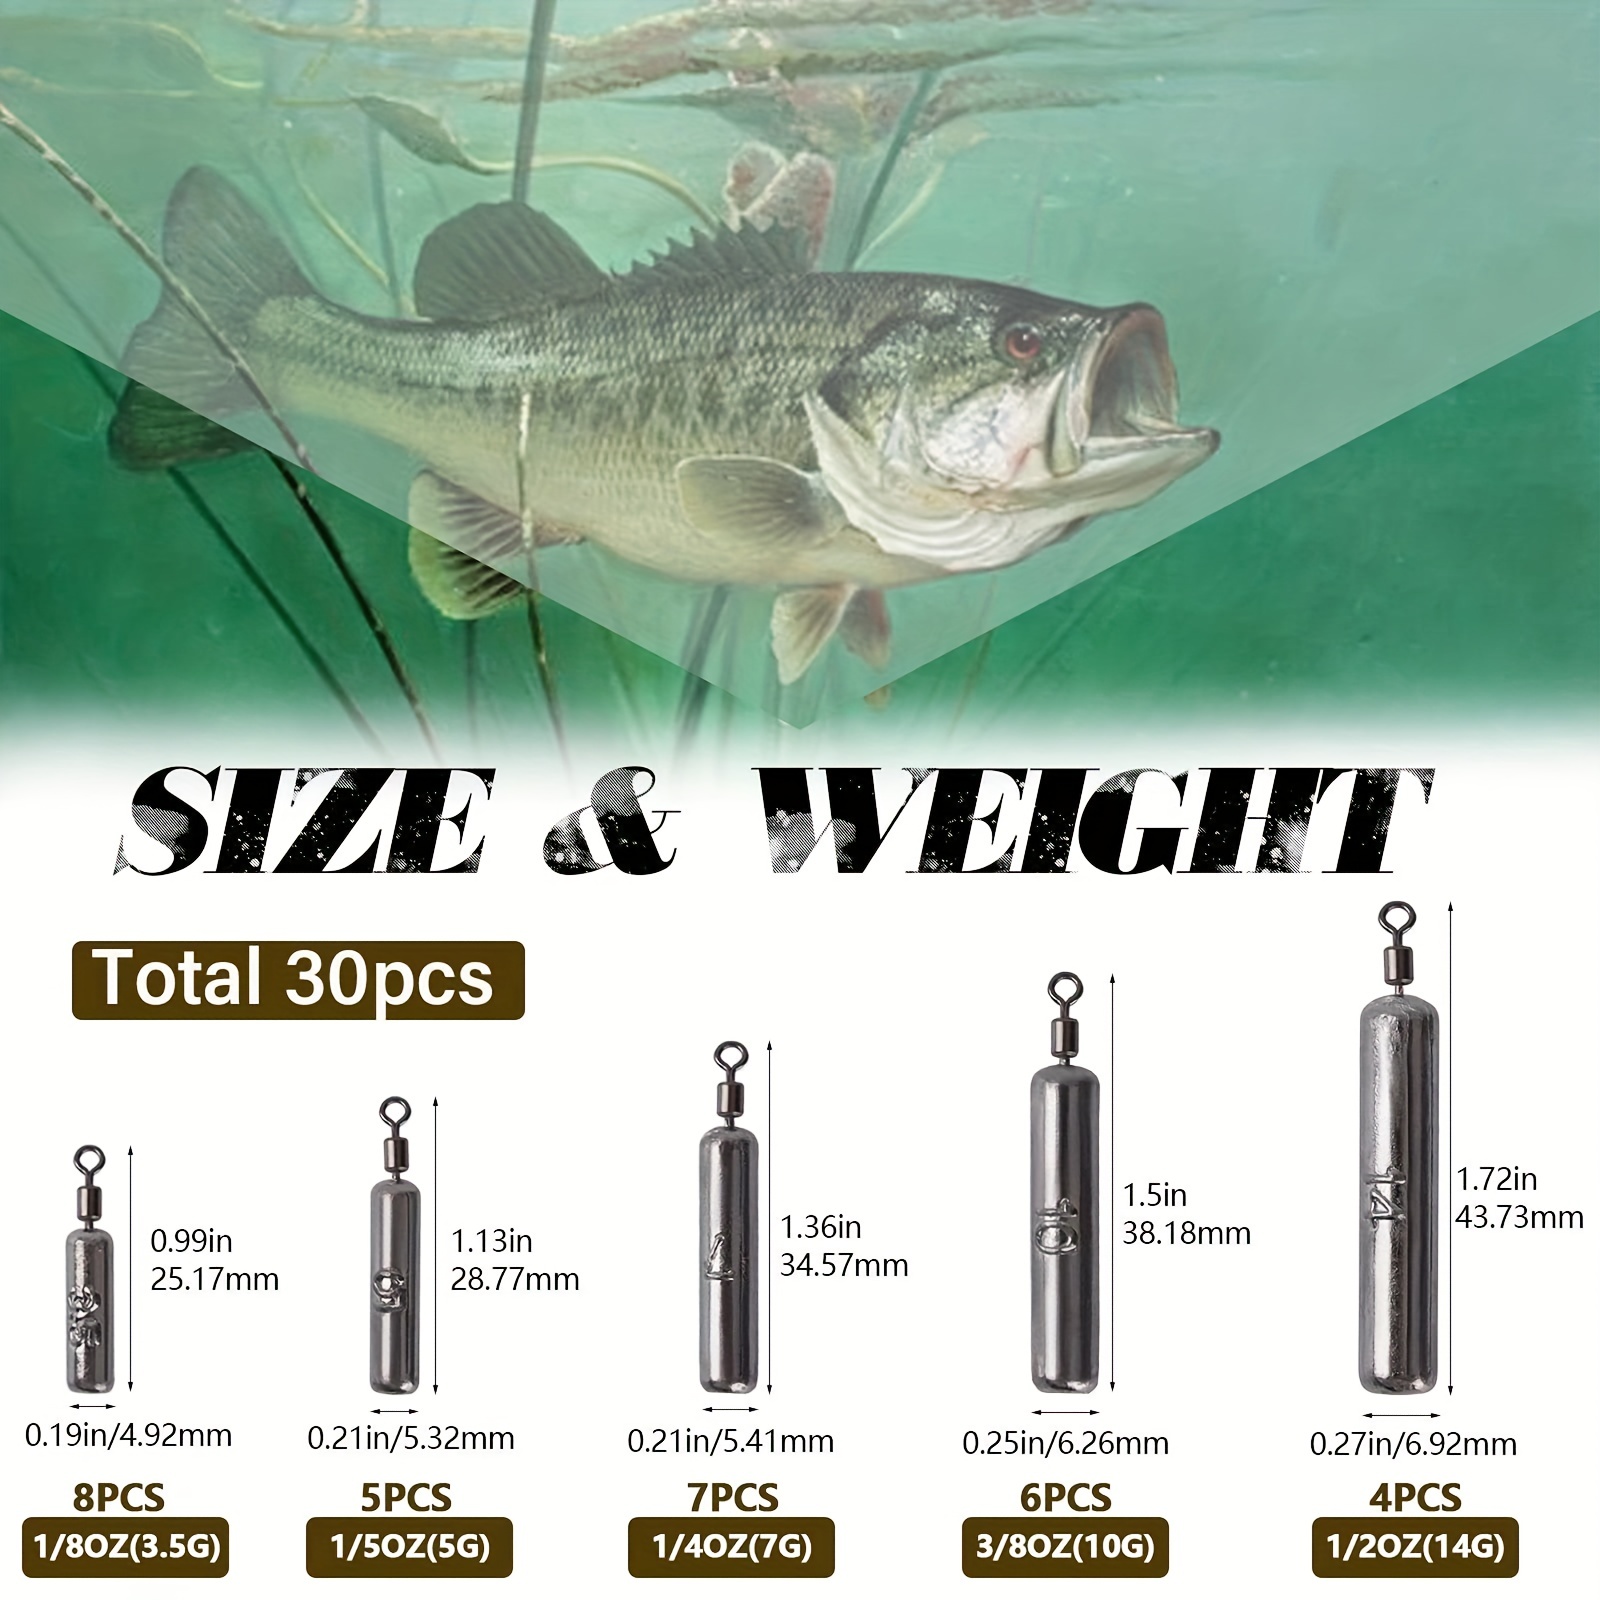 Wholesale sea fishing weights to Improve Your Fishing 